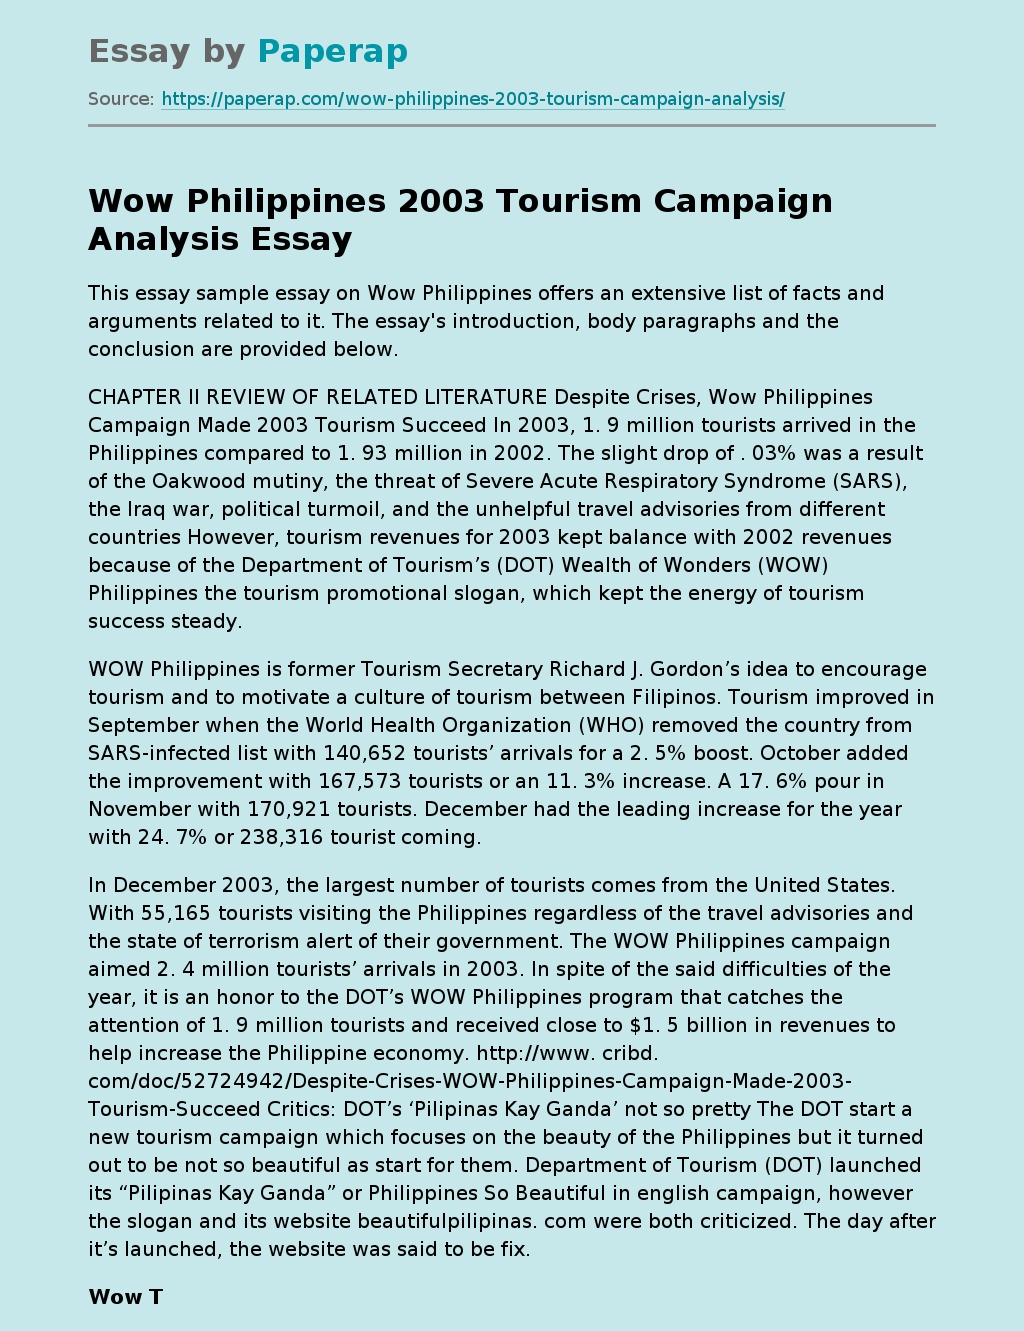 Wow Philippines 2003 Tourism Campaign Analysis